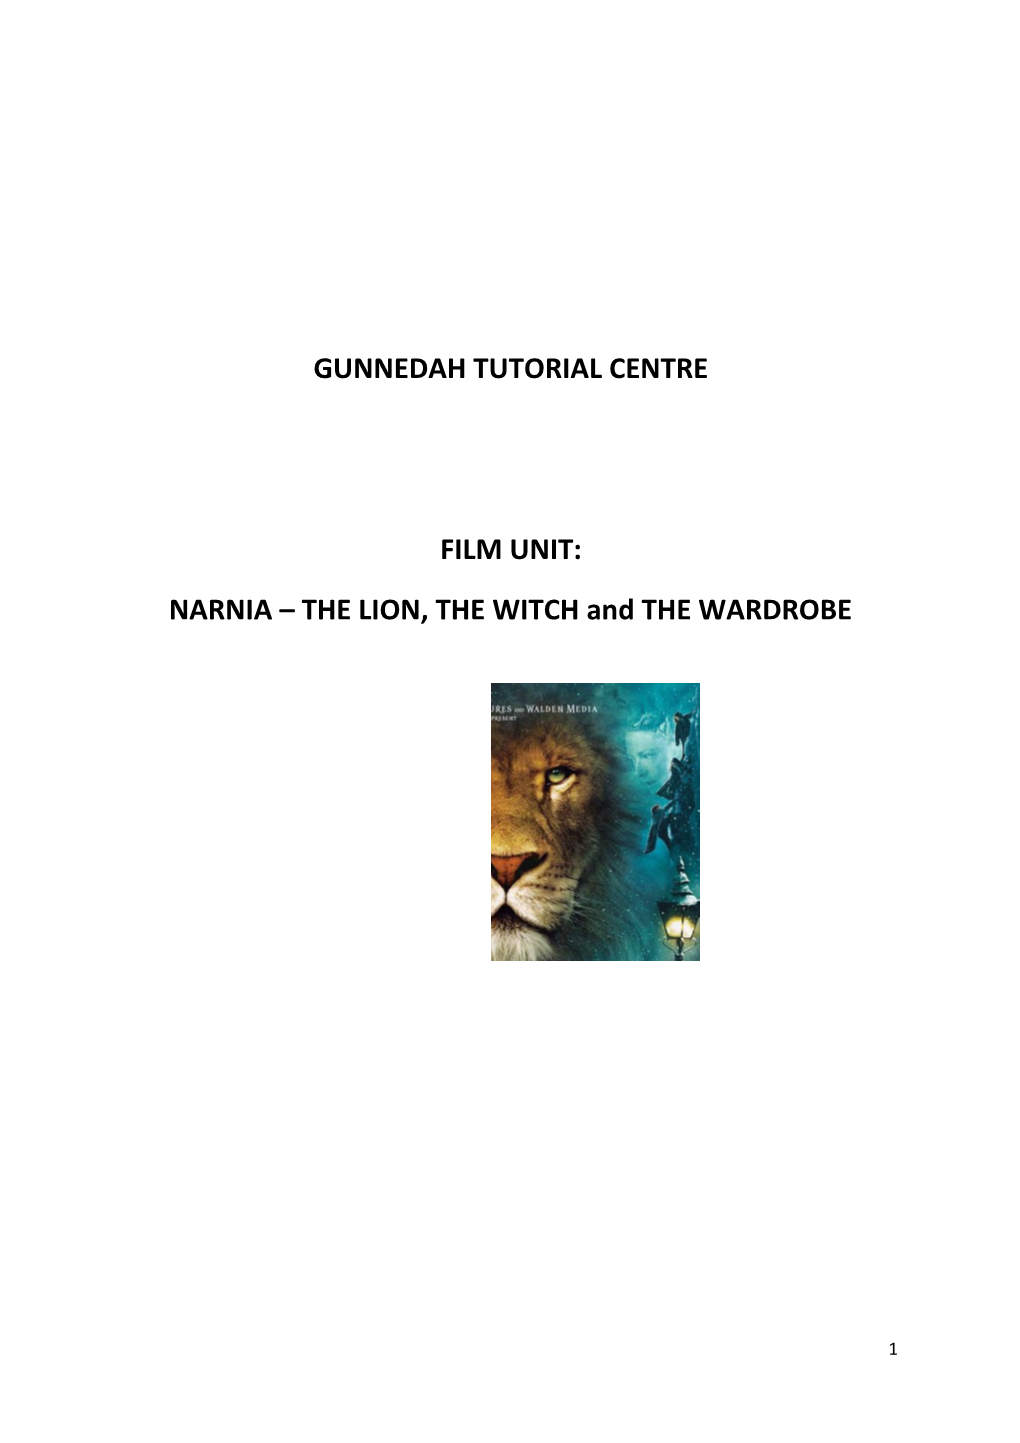 NARNIA the LION, the WITCH and the WARDROBE